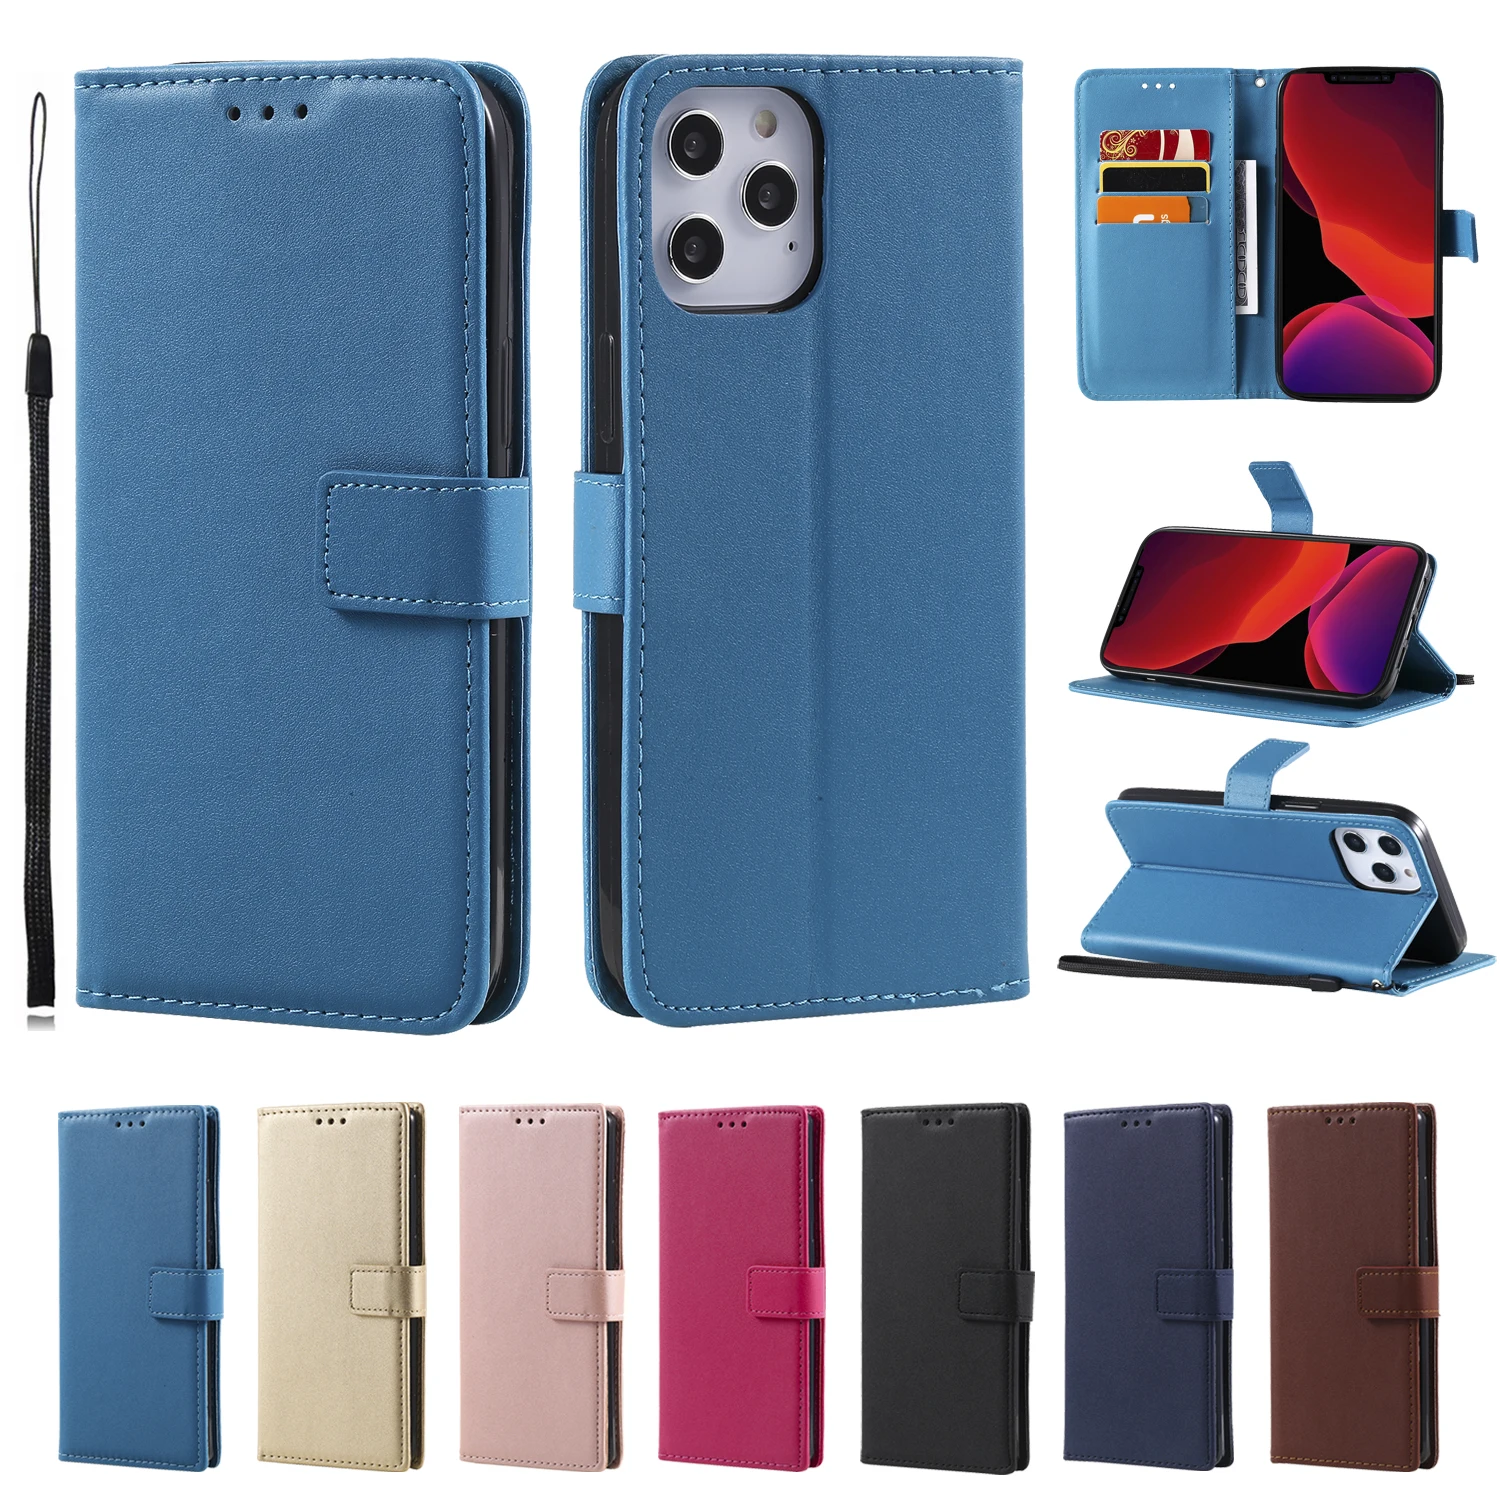 

PU Leather Wallet Case For Samsung Galaxy S8 S9 S10 Plus S20 FE S21 Ultra S6 S7 Edge S3 S4 S5 Mini Flip Card Slots Stand Cover